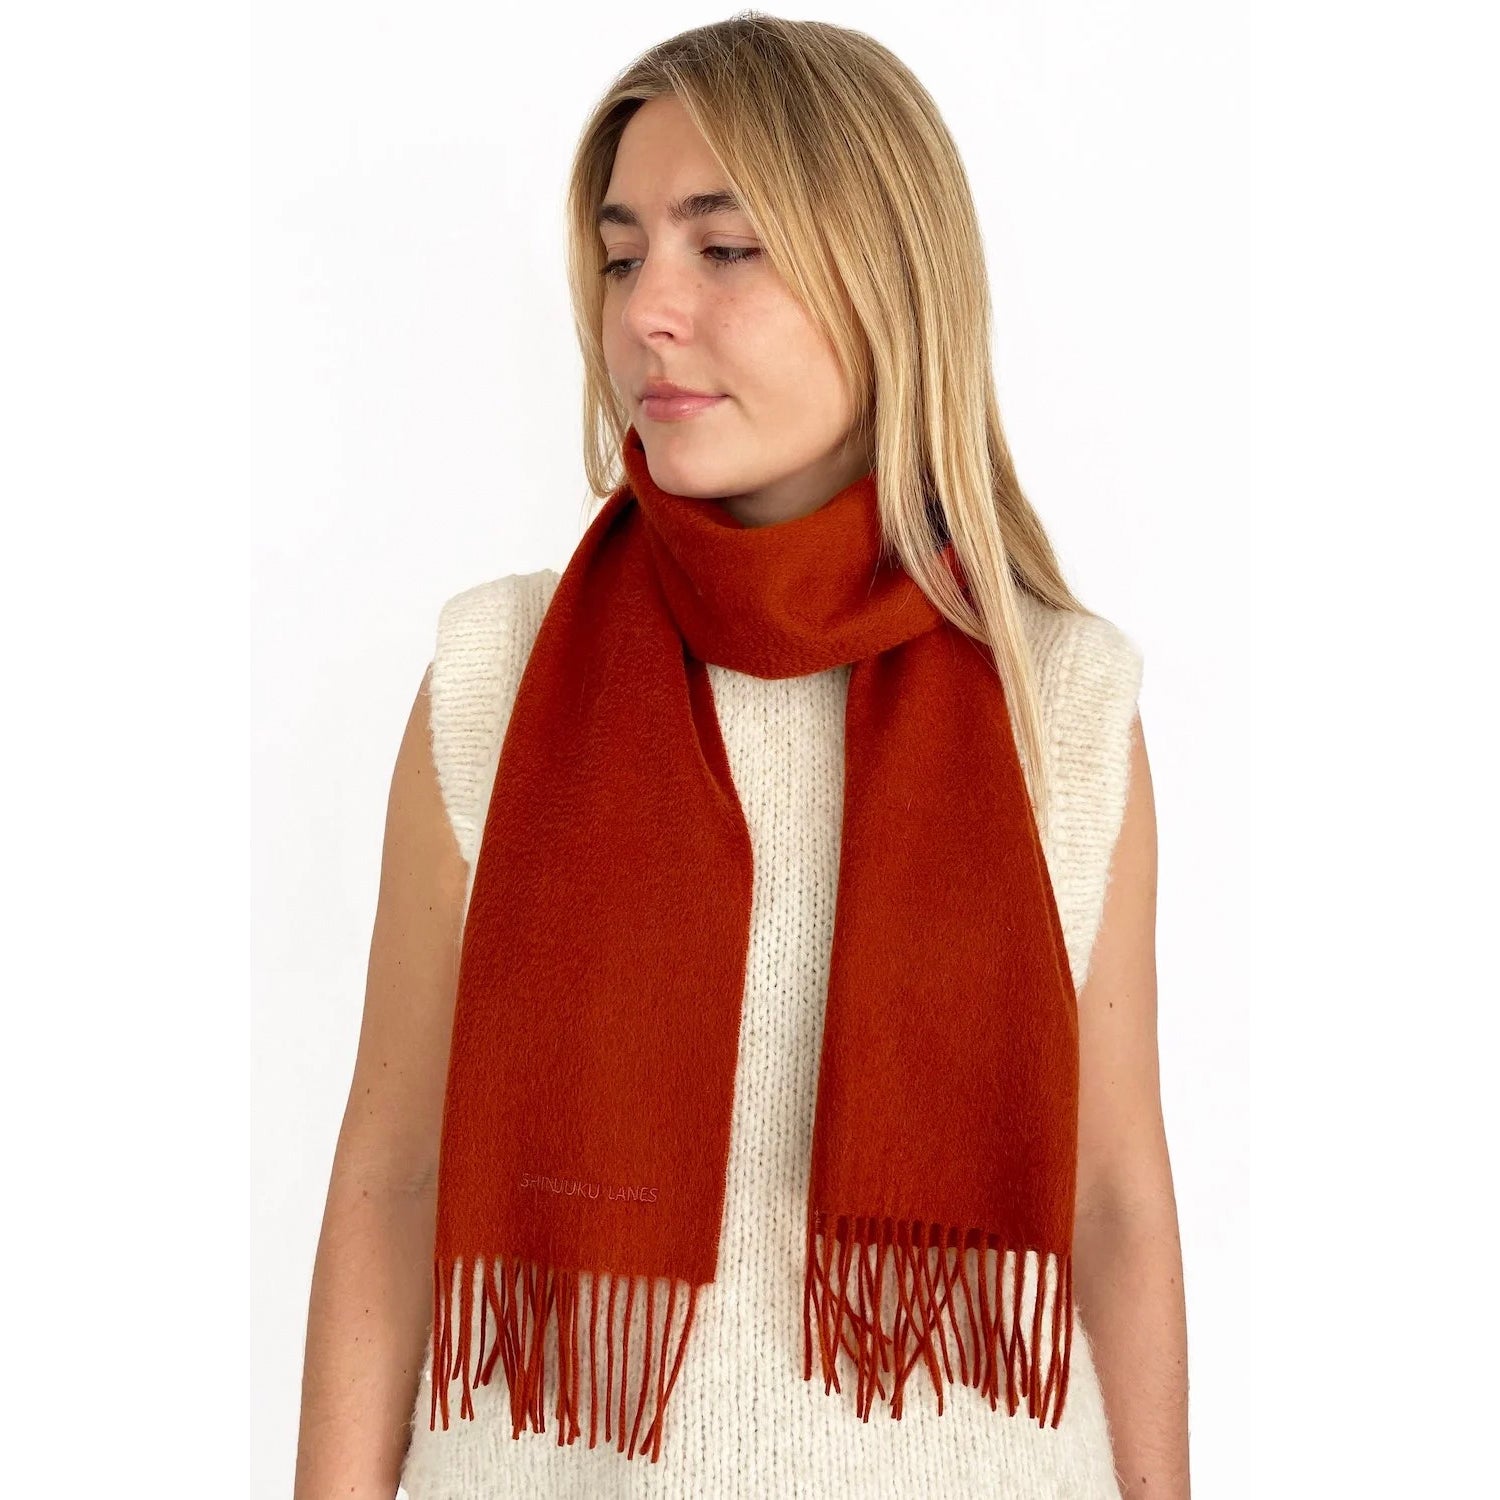 Product picture of 100% Organic Cashmere Scarf - Cinnabar Red